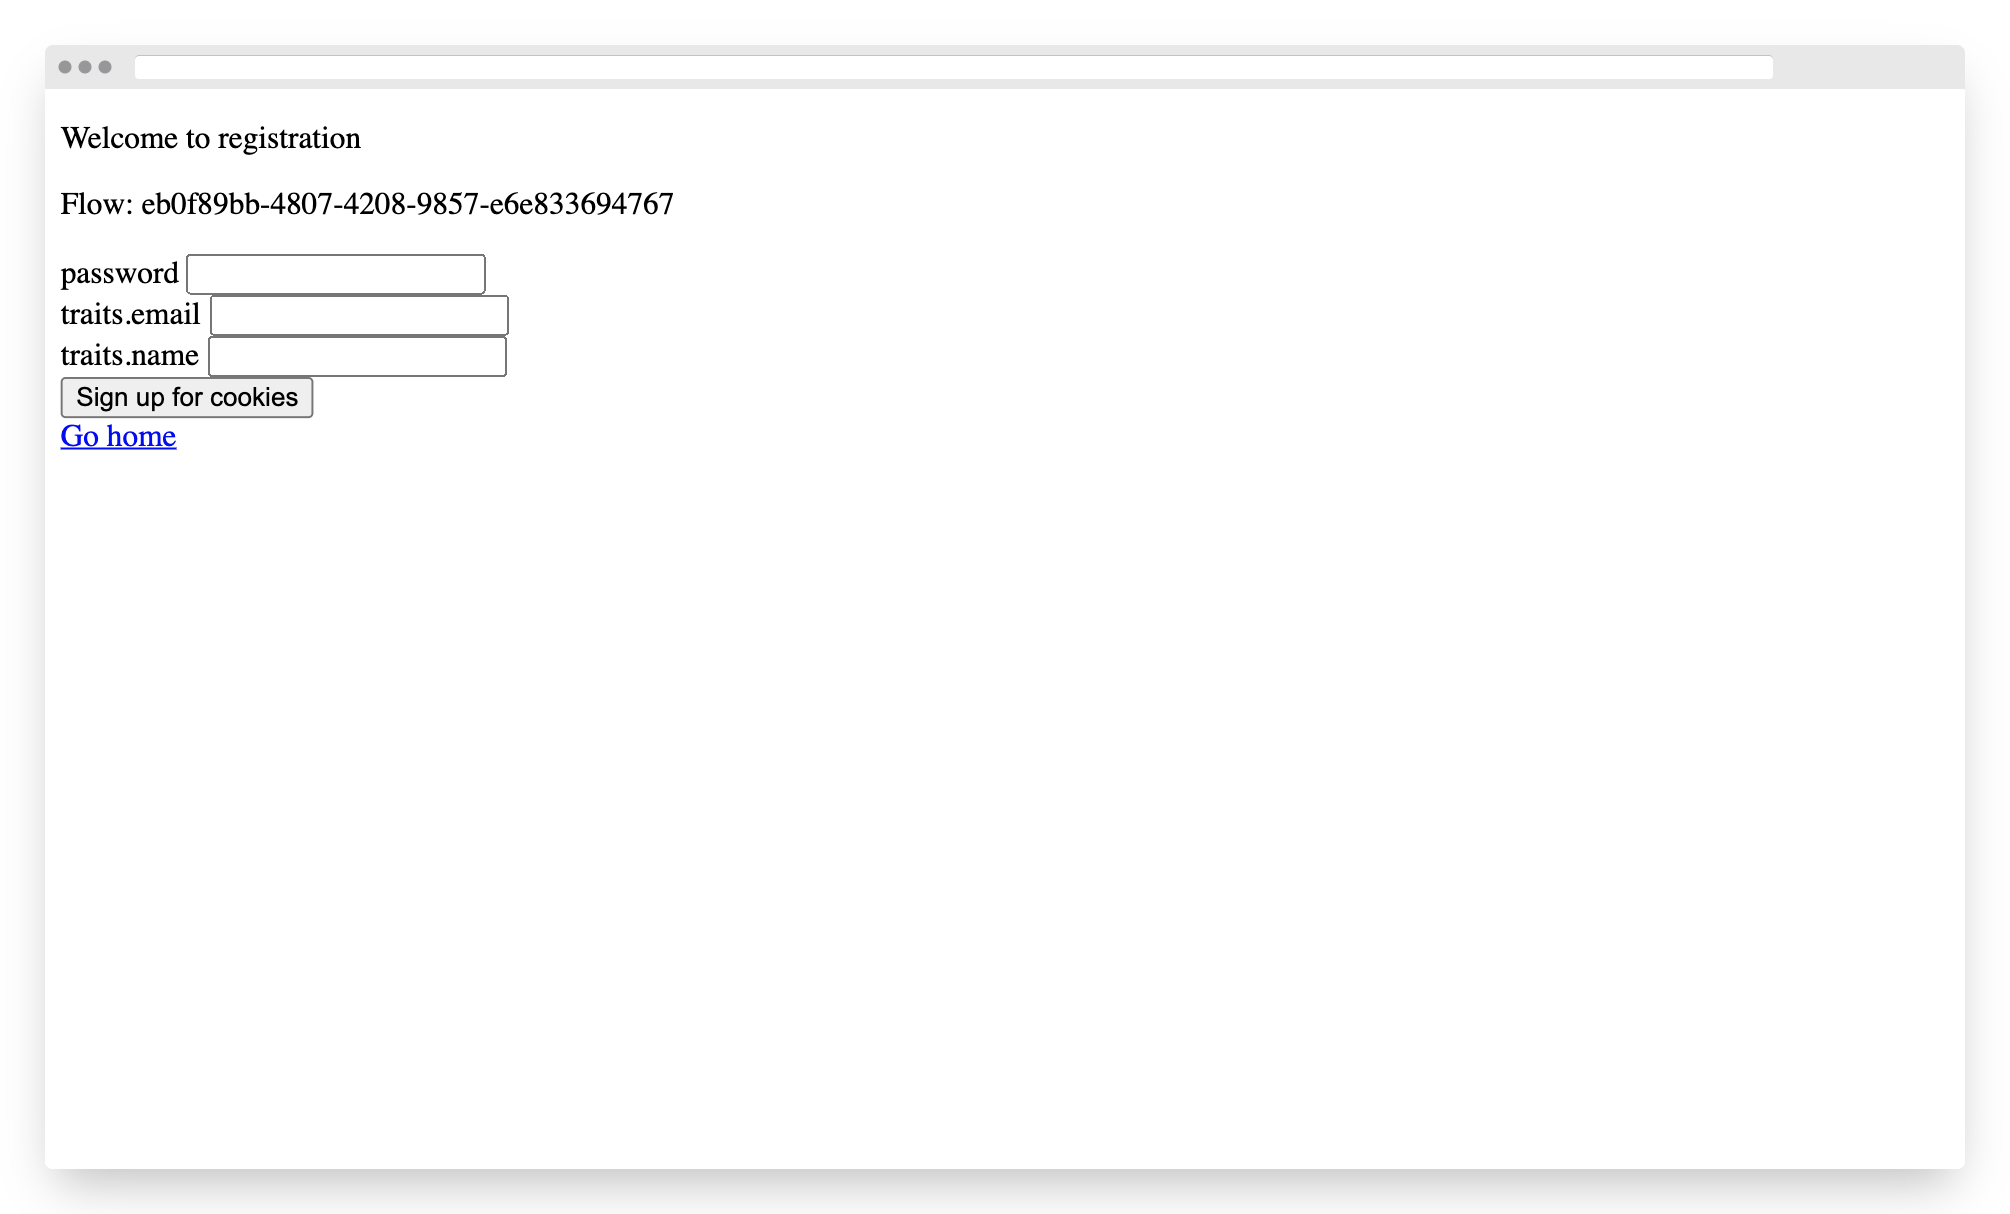 Browser window with unstyled html form. Inputs for password, email, and username. Sign up button below that.